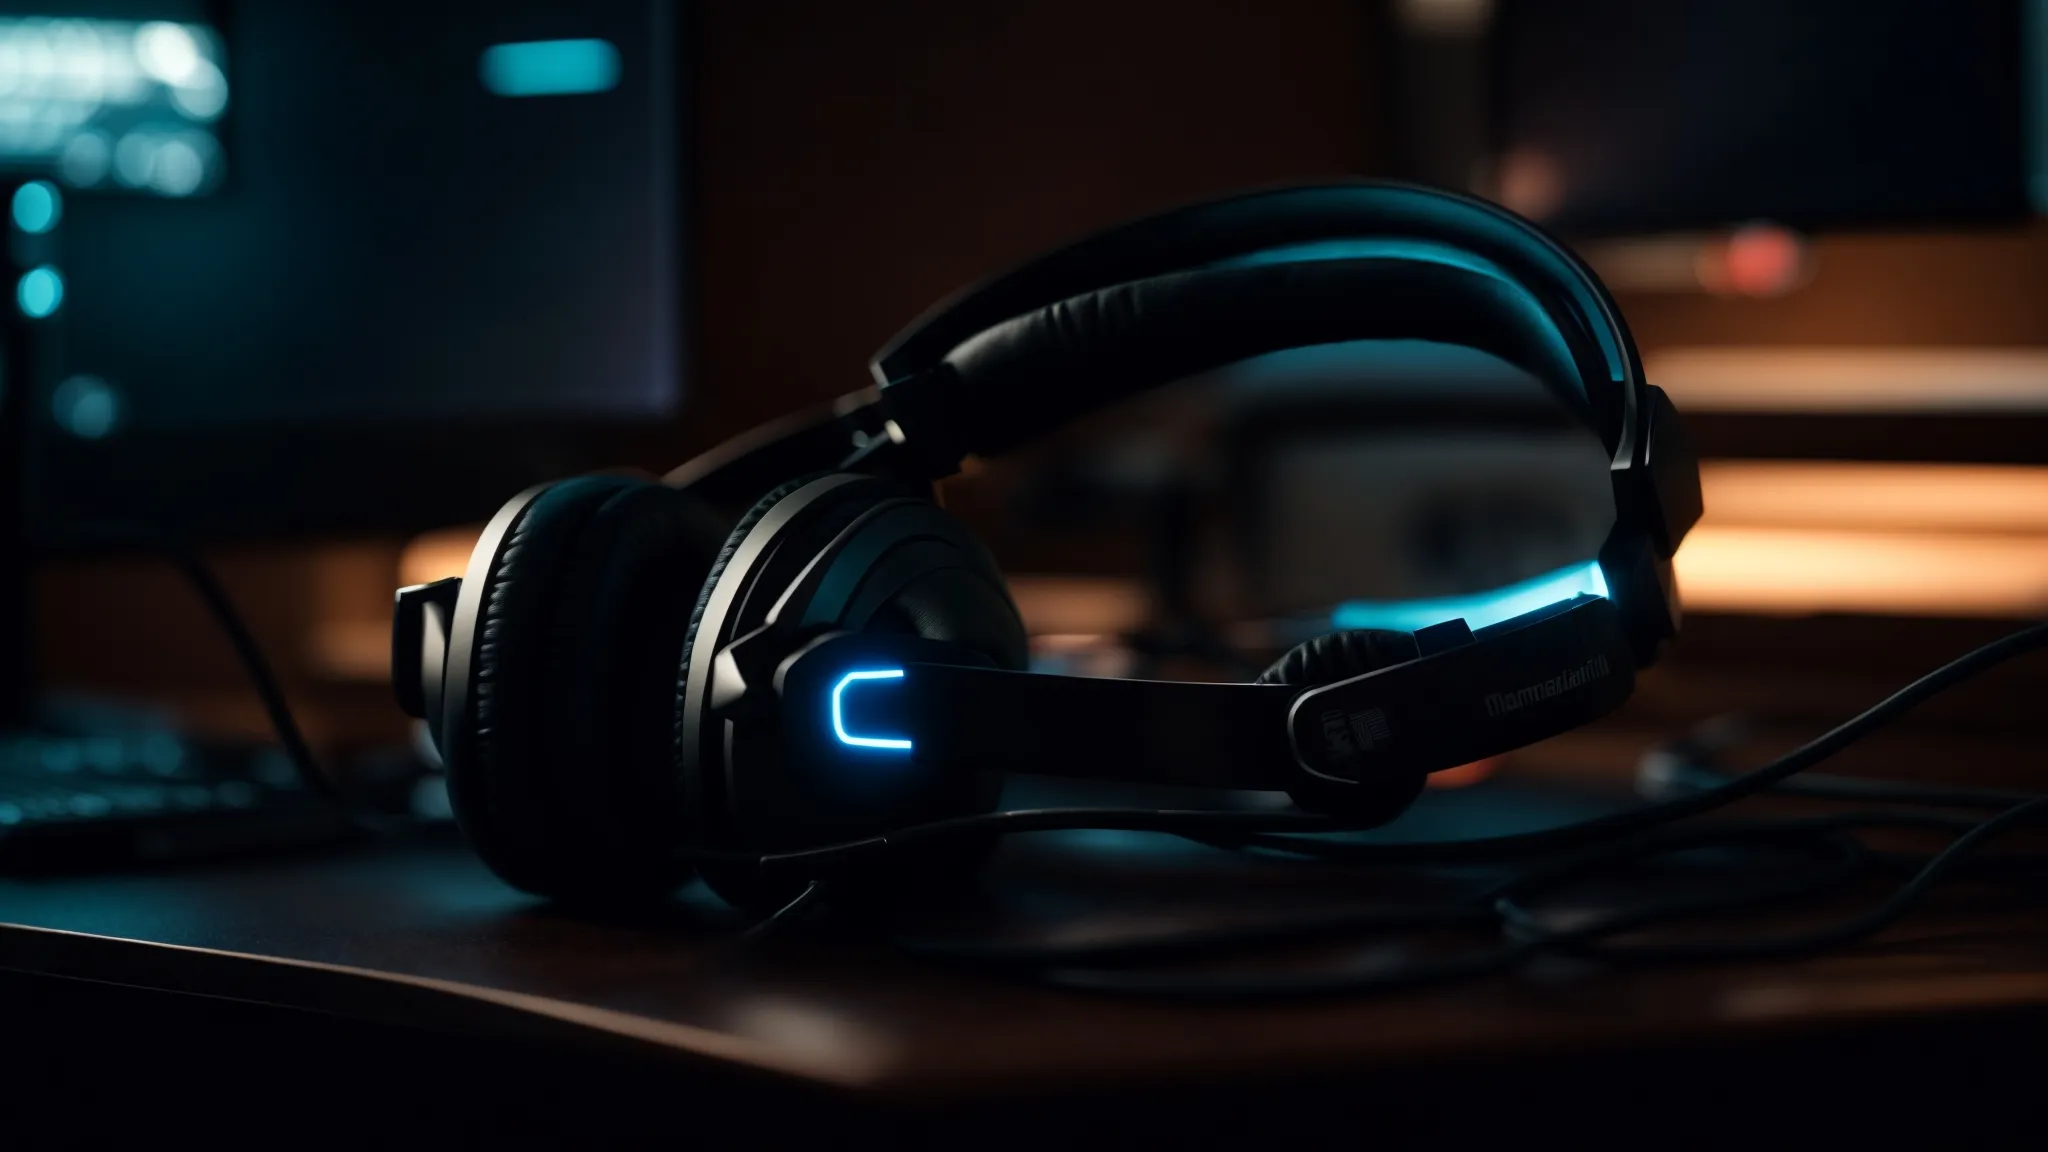 a gaming headset rests on a dark, sleek desk, illuminated by the soft glow of a computer monitor in a dimly lit room.